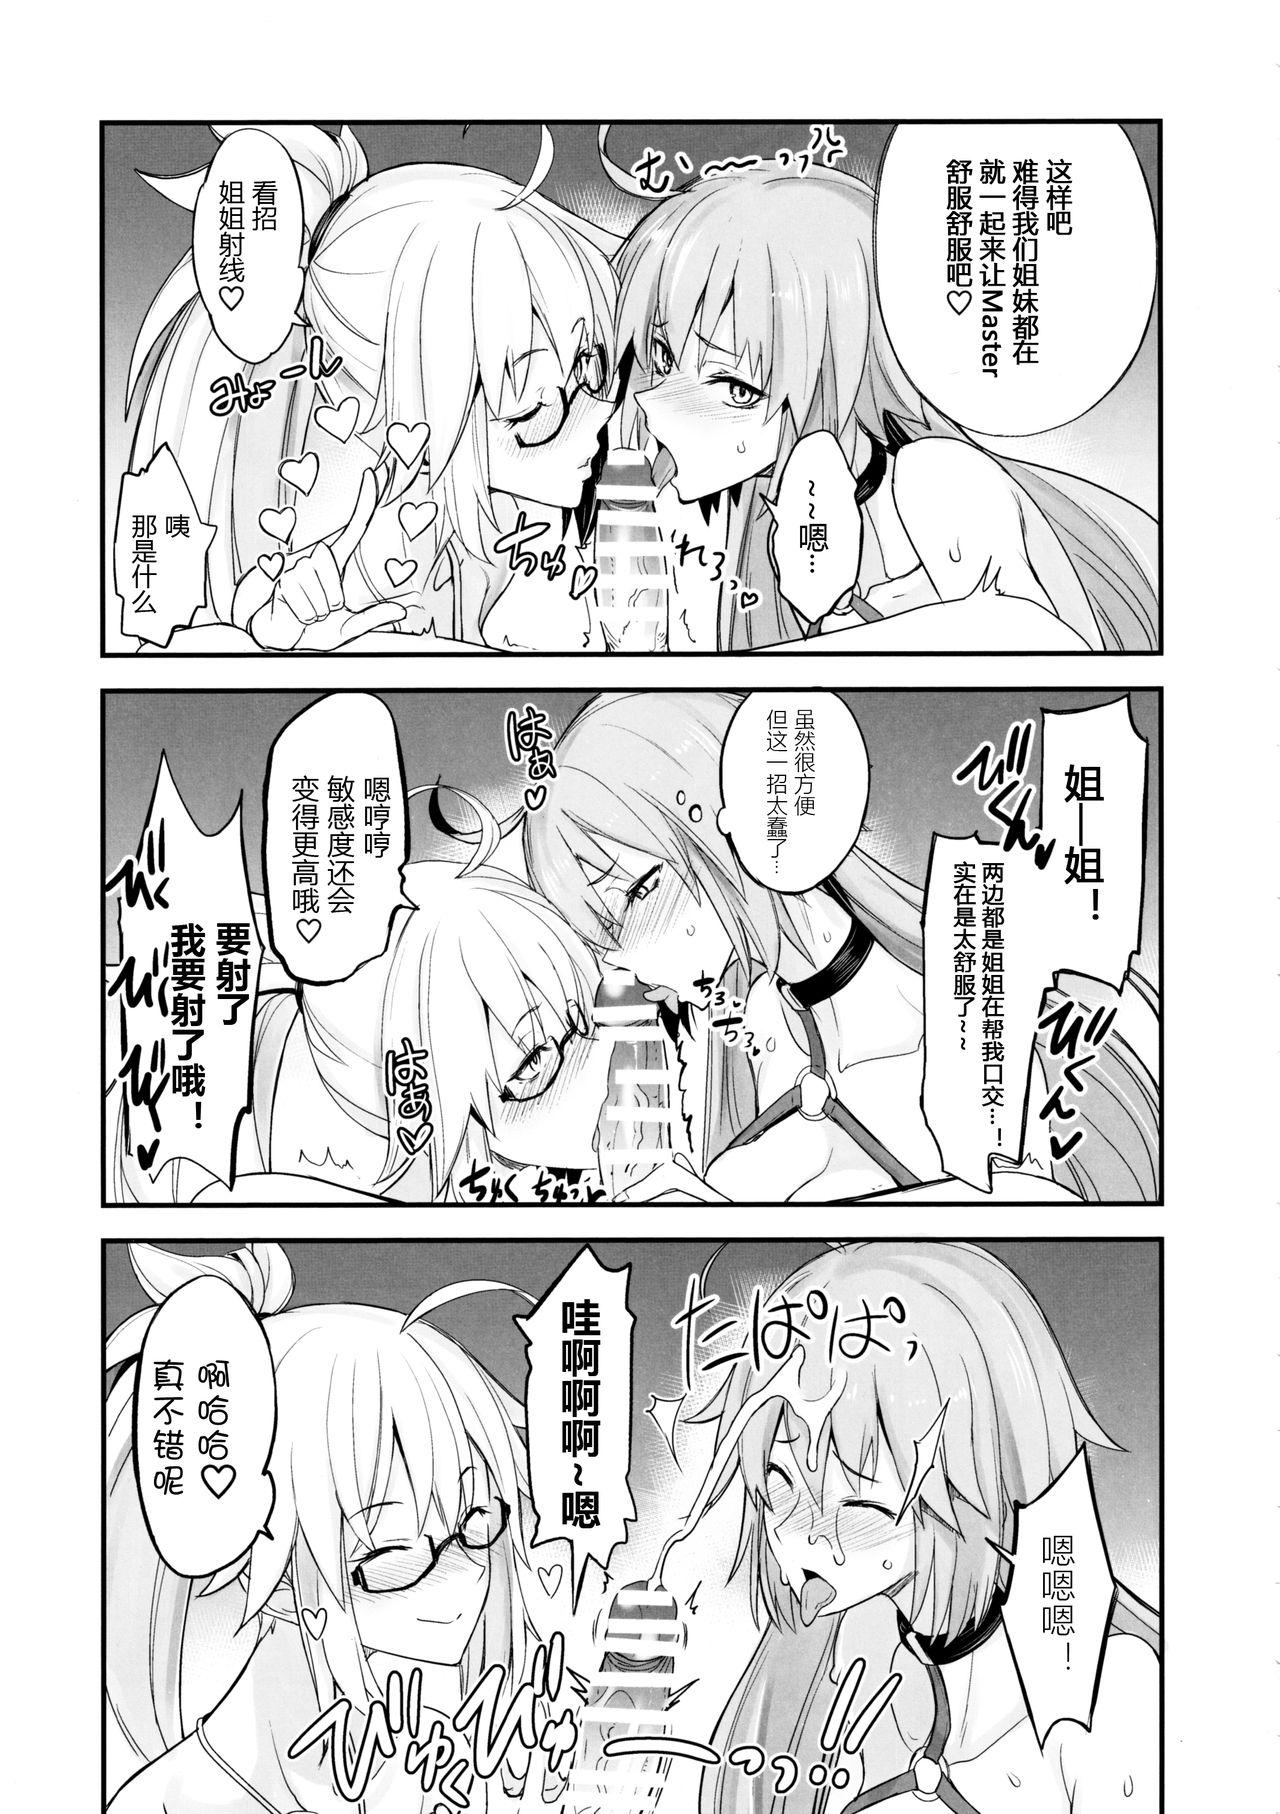 Phat Ass W Jeanne vs Master - Fate grand order Gay Pawn - Page 11